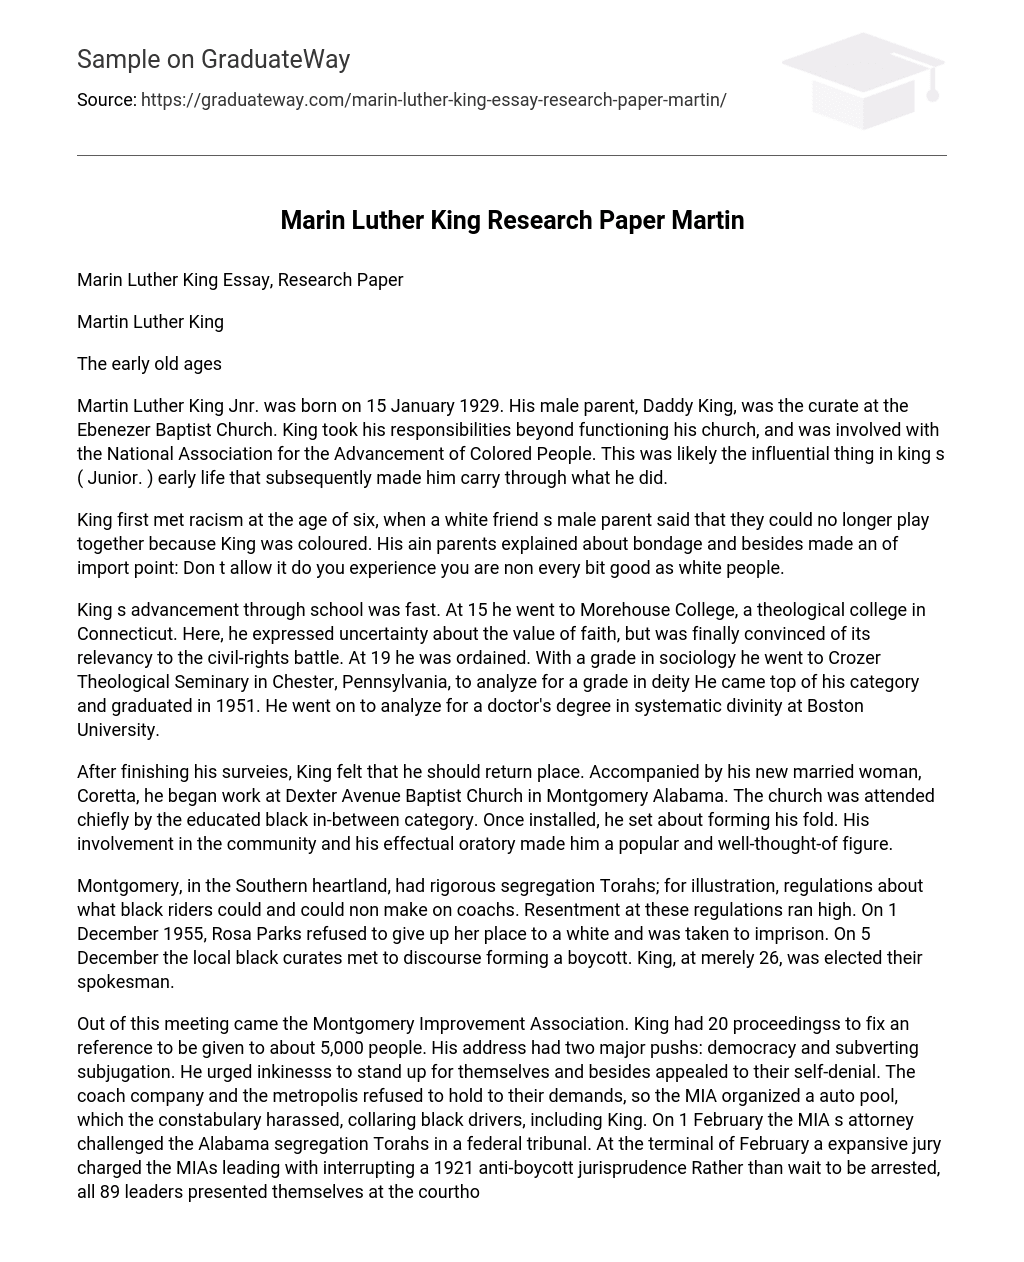 Marin Luther King Research Paper Martin